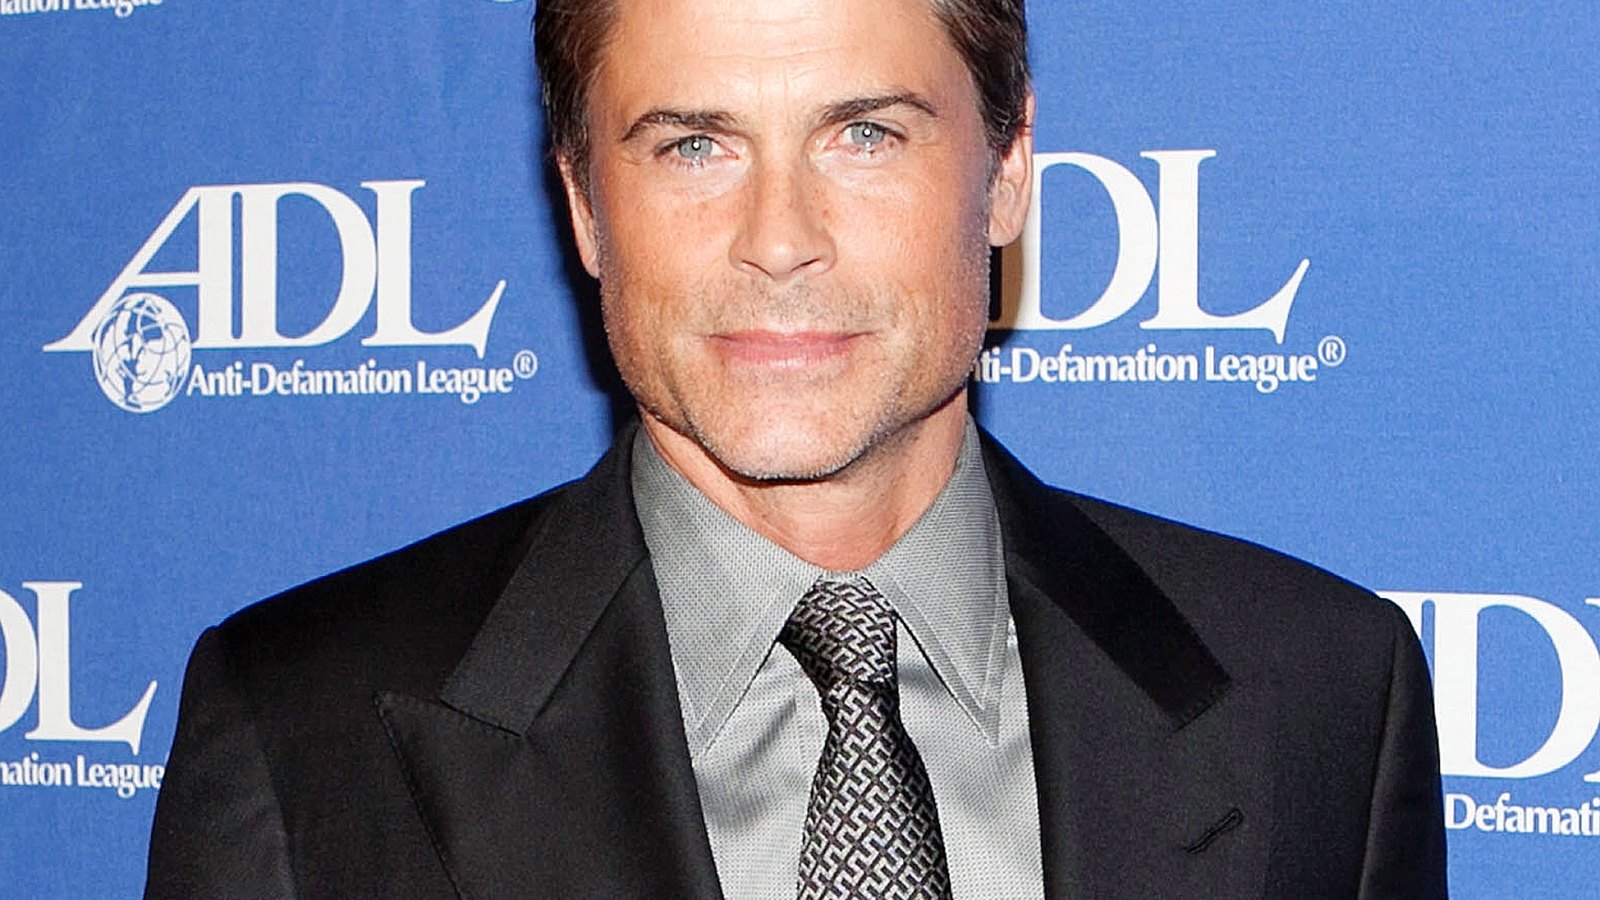 Rob Lowe attends an event on October 16, 2012